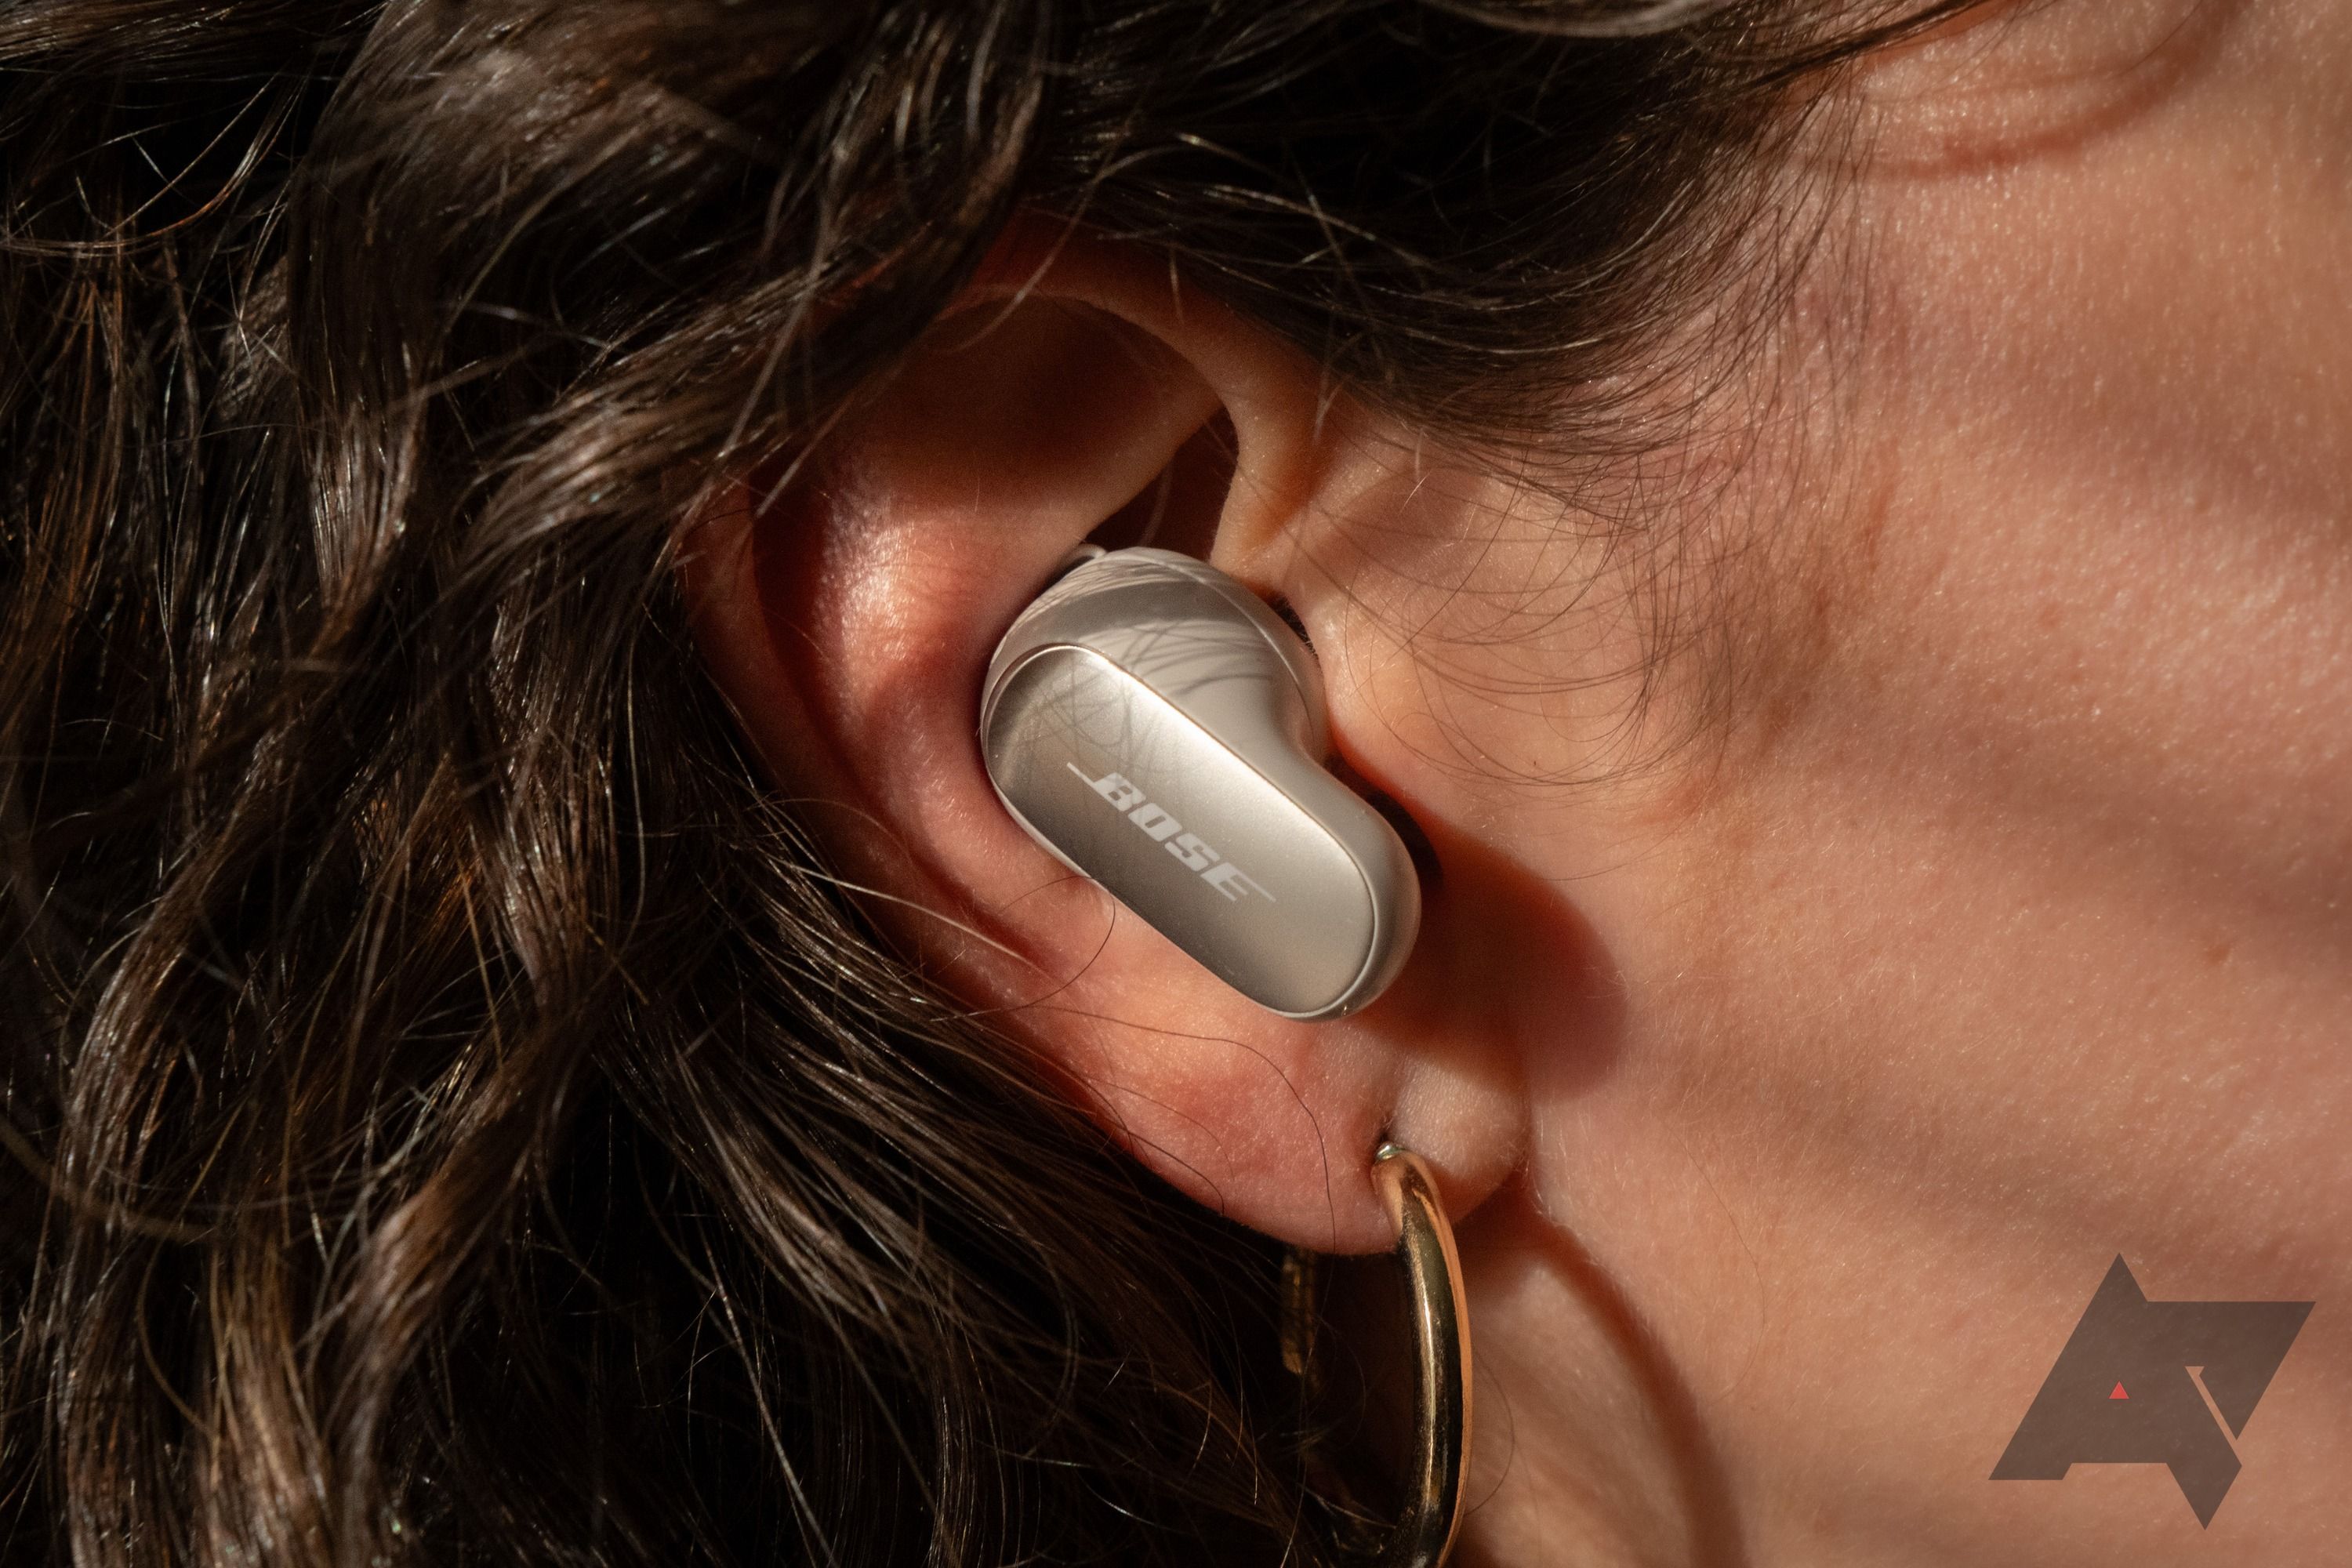 Close-up image of Bose QuietComfort Ultra earbuds comfortably positioned in a user's ear, showcasing their sleek design and fit.